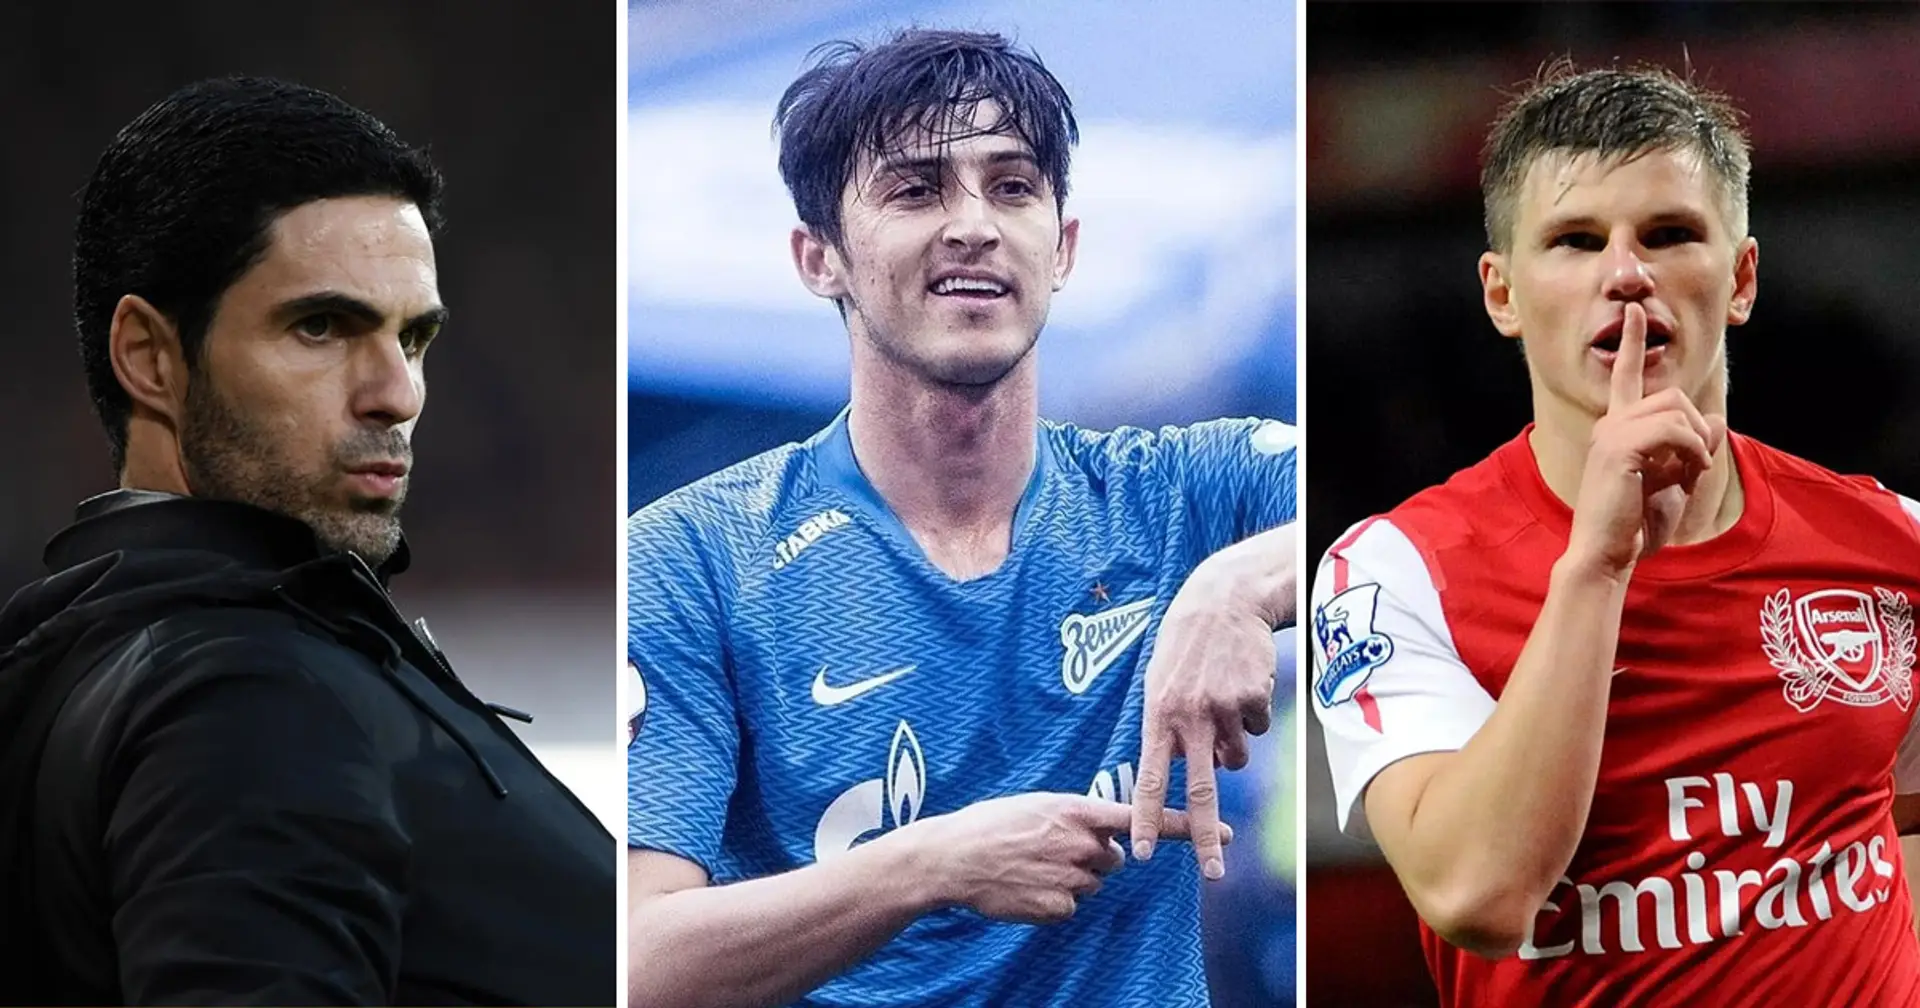 Arteta has had 'contact' with former teammate Arshavin over potential move for Zenit forward Azmoun